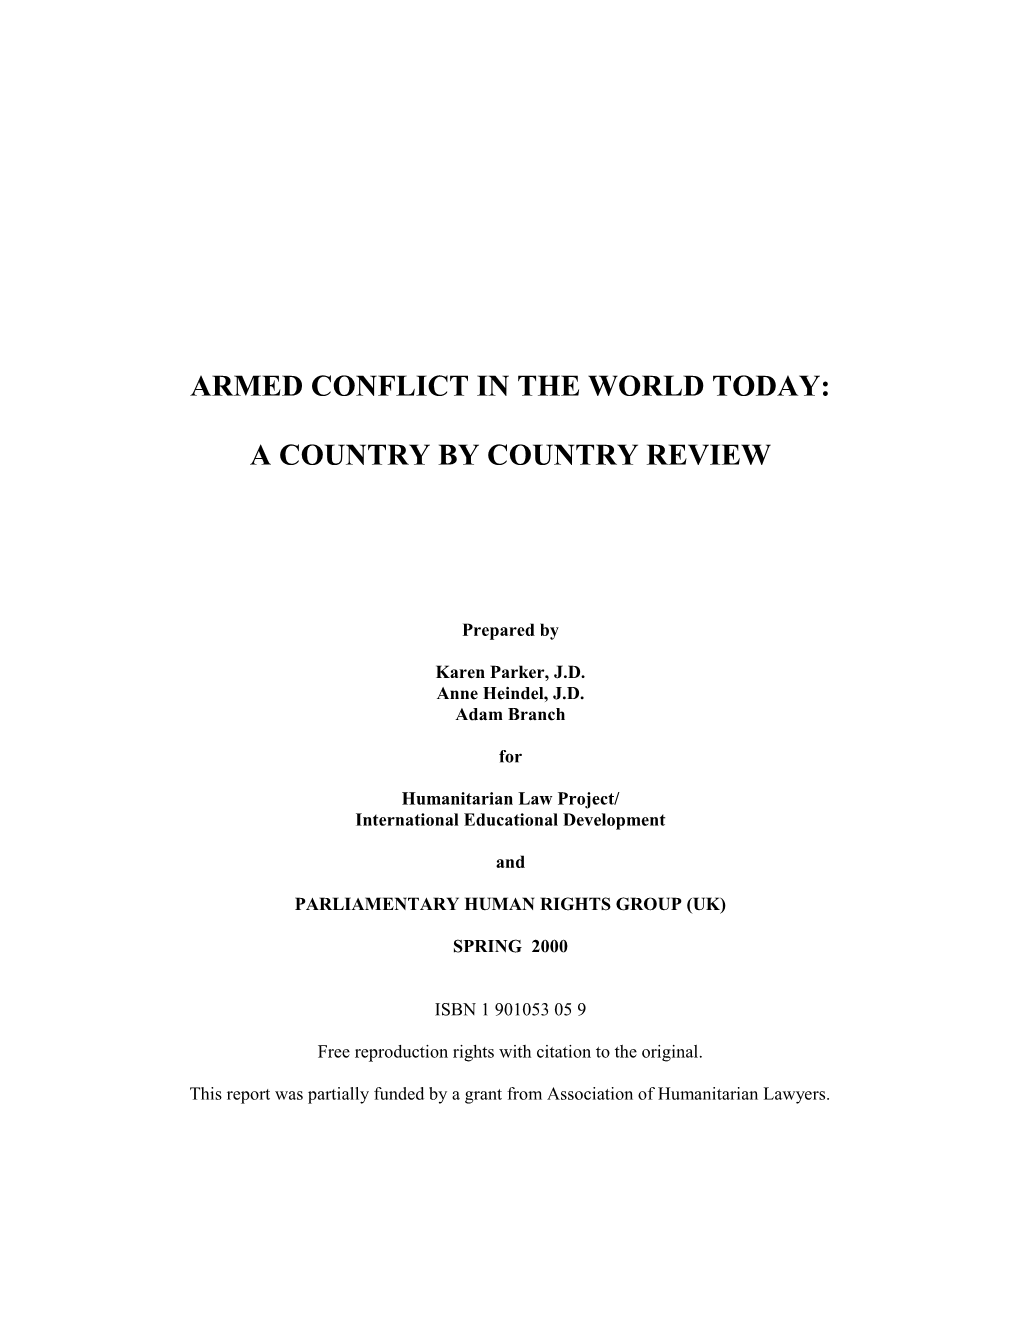 Armed Conflict in the World Today